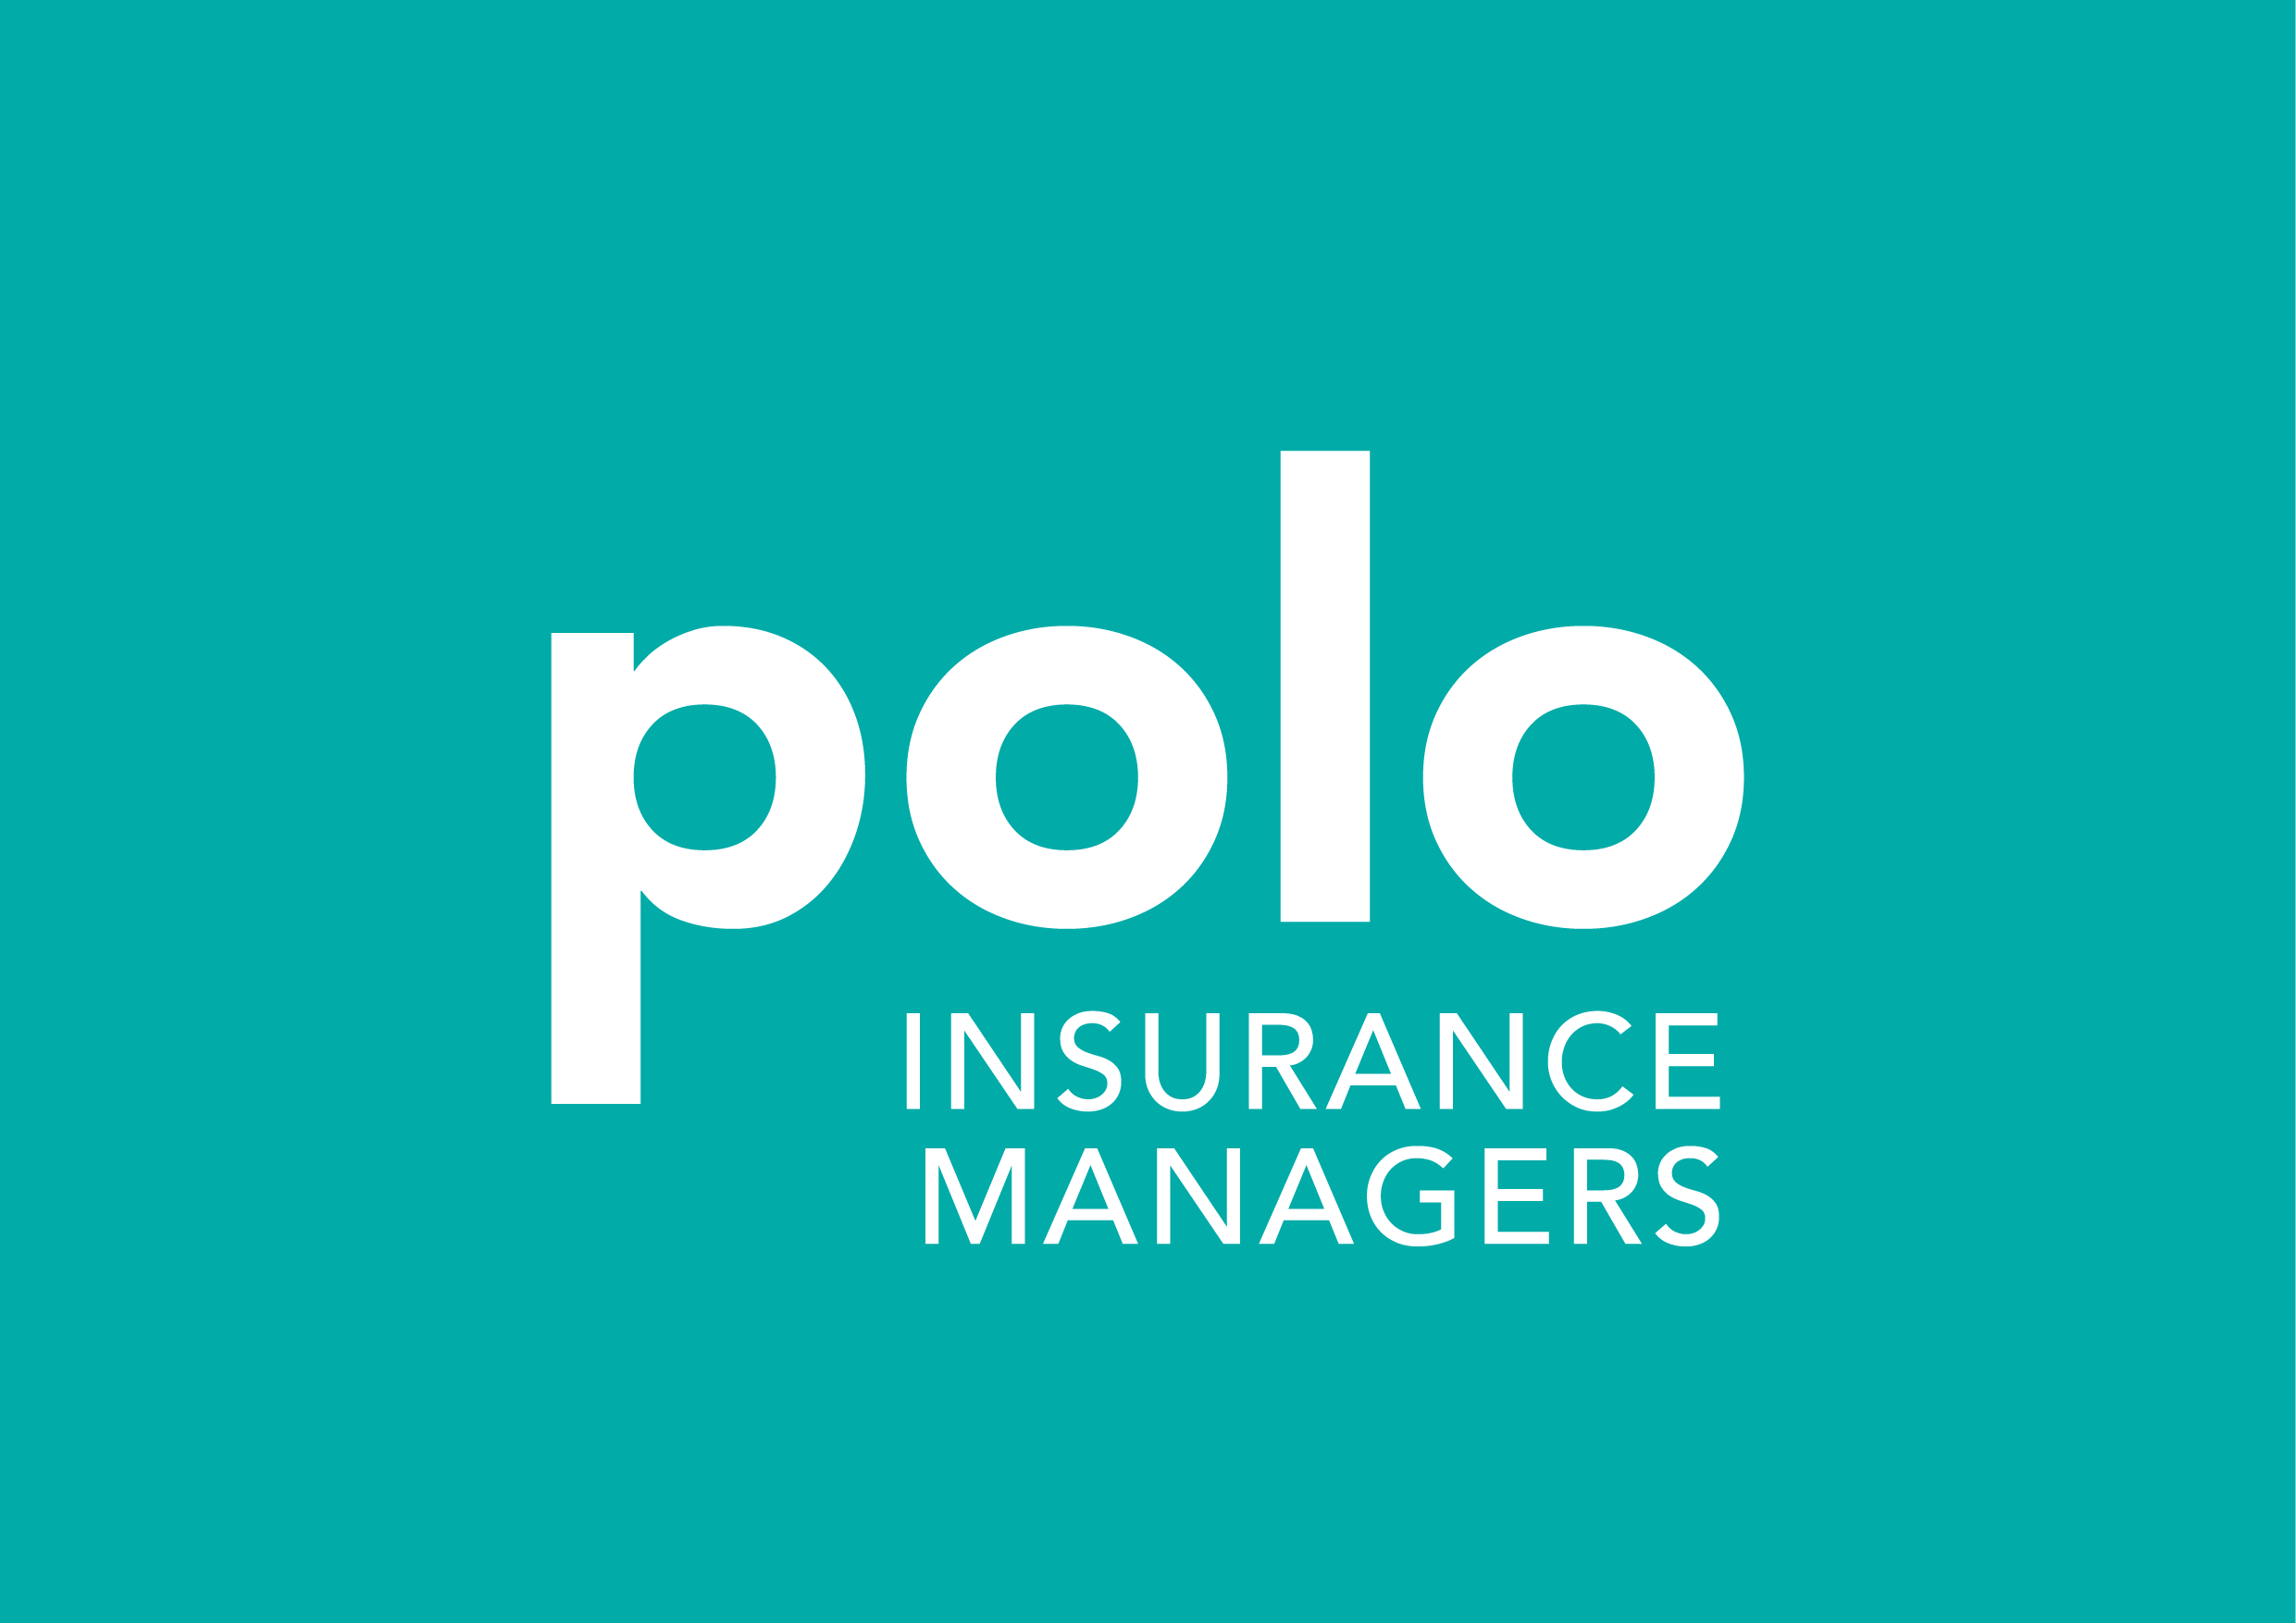 Polo Insurance Managers